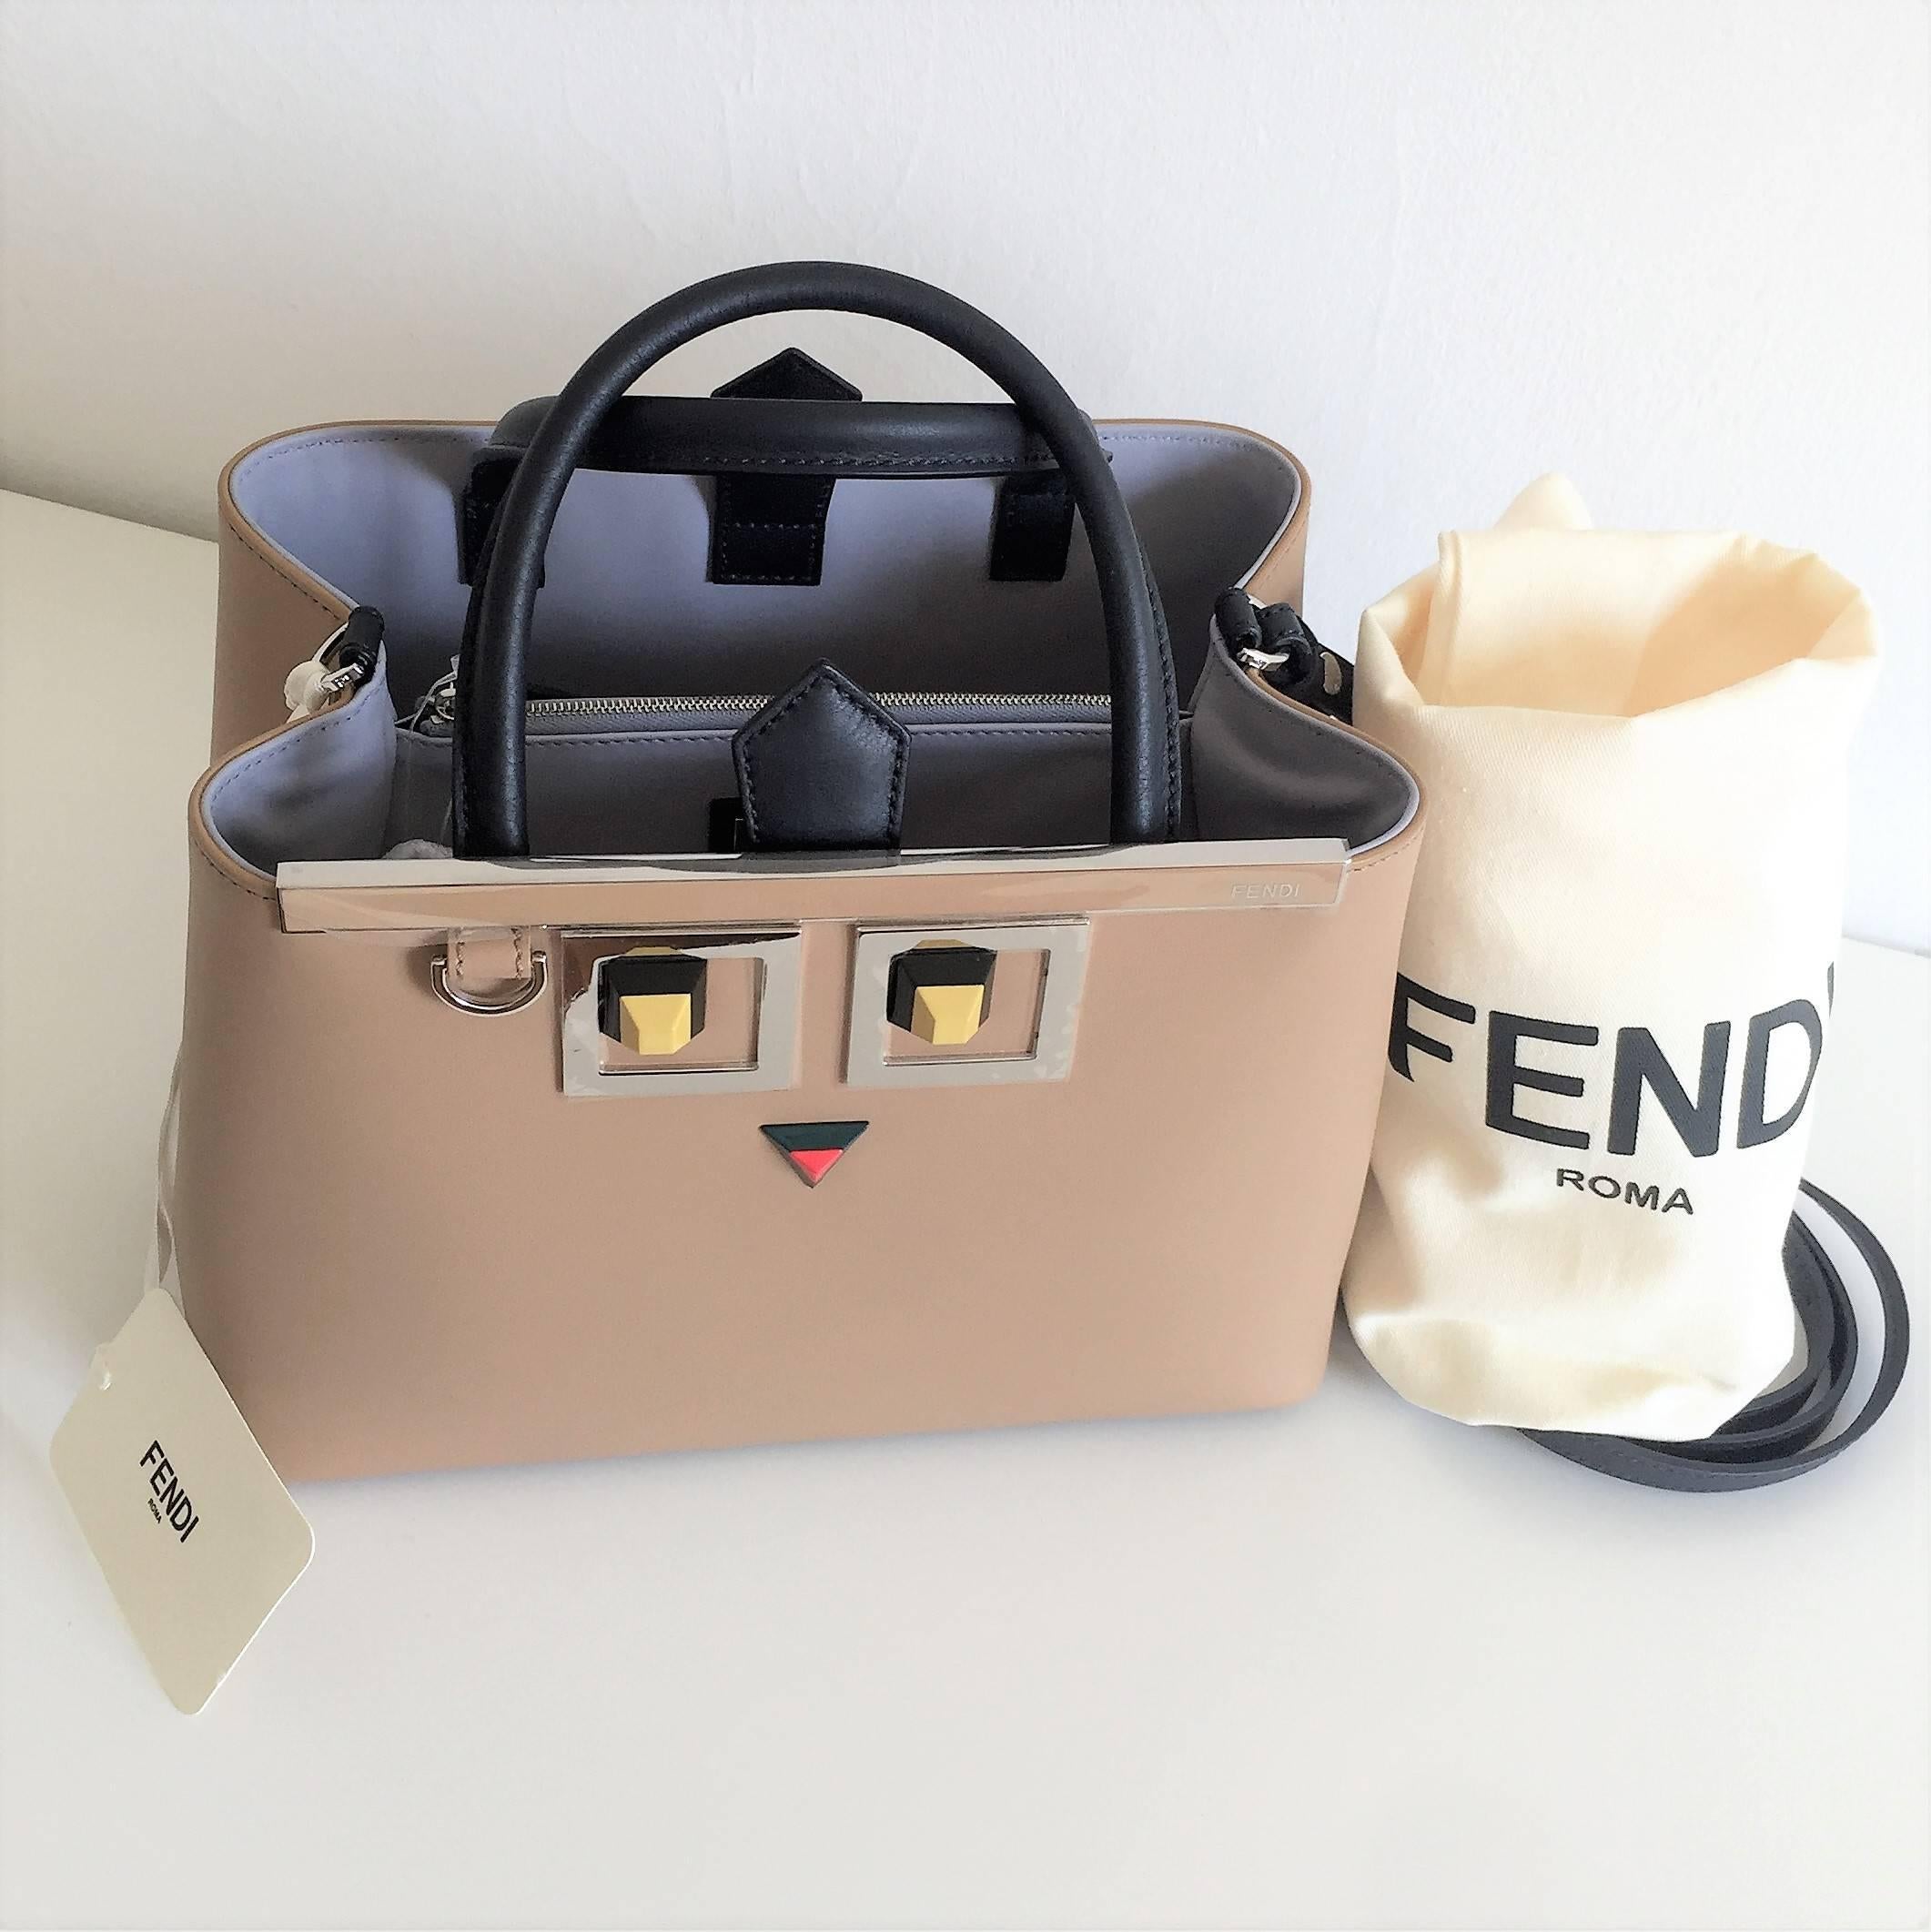 This is an unworm brand new 2017 Fendi 'Occhi' tote made in camel-coloured calfskin leather decorated with metal appliqués and two-tone studs that create the iconic Square Eyes motif. Enamel bar with Fendi logo. Palladium edging and metalware.